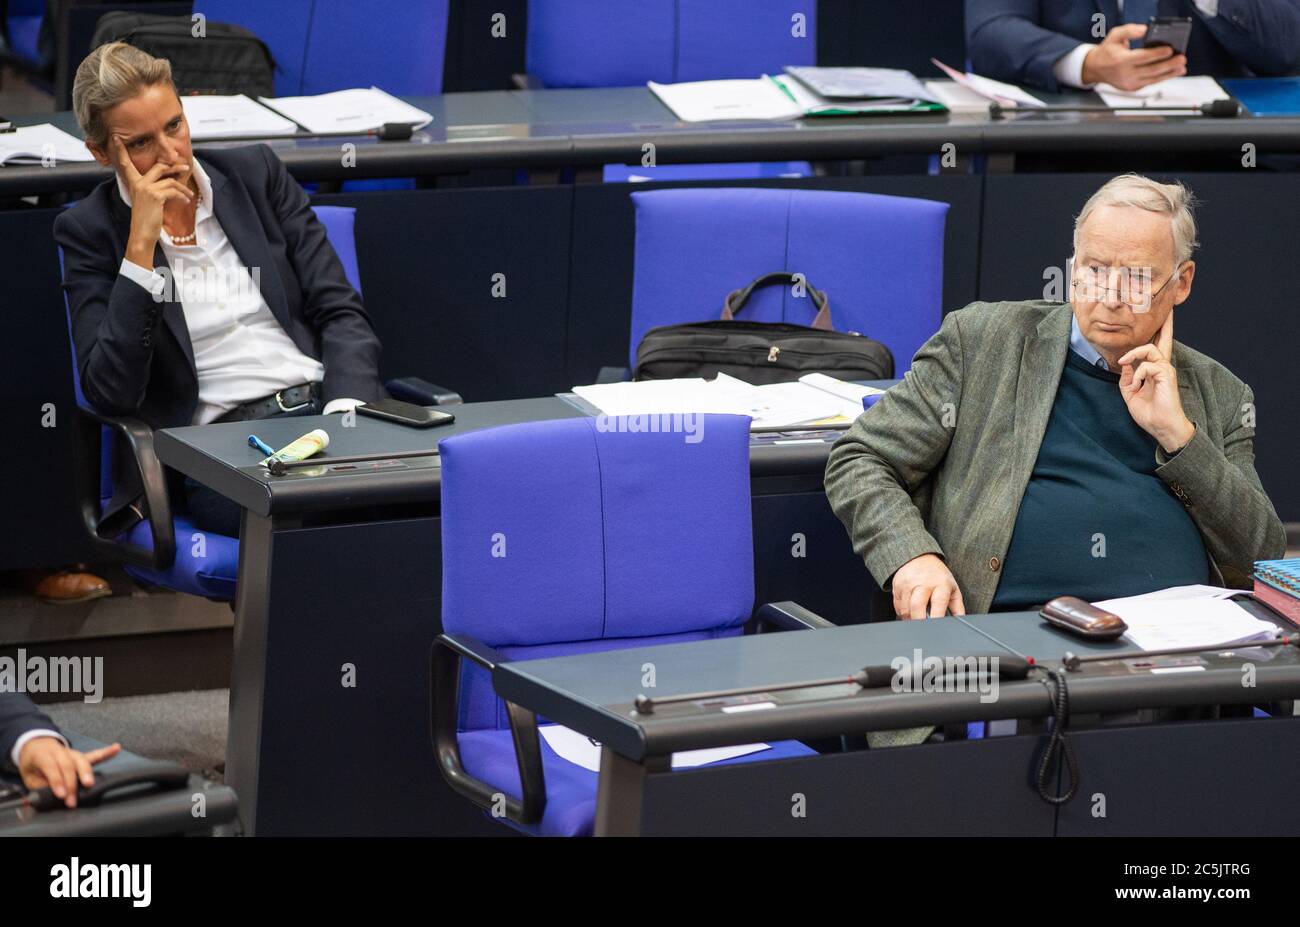 Berlin, Germany. 03rd July, 2020. The leaders of the AfD parliamentary group, Alice Weidel and Alexander Gauland, are sitting in the plenary session of the German Bundestag. The main topics of the 171st session of the 19th legislative period are the adoption of the Coal Exit Act, a topical hour on the excesses of violence in Stuttgart, as well as debates on electoral law reform, the protection of electronic patient data, the welfare of farm animals and the German chairmanship of the UN Security Council. Credit: Christophe Gateau/dpa/Alamy Live News Stock Photo